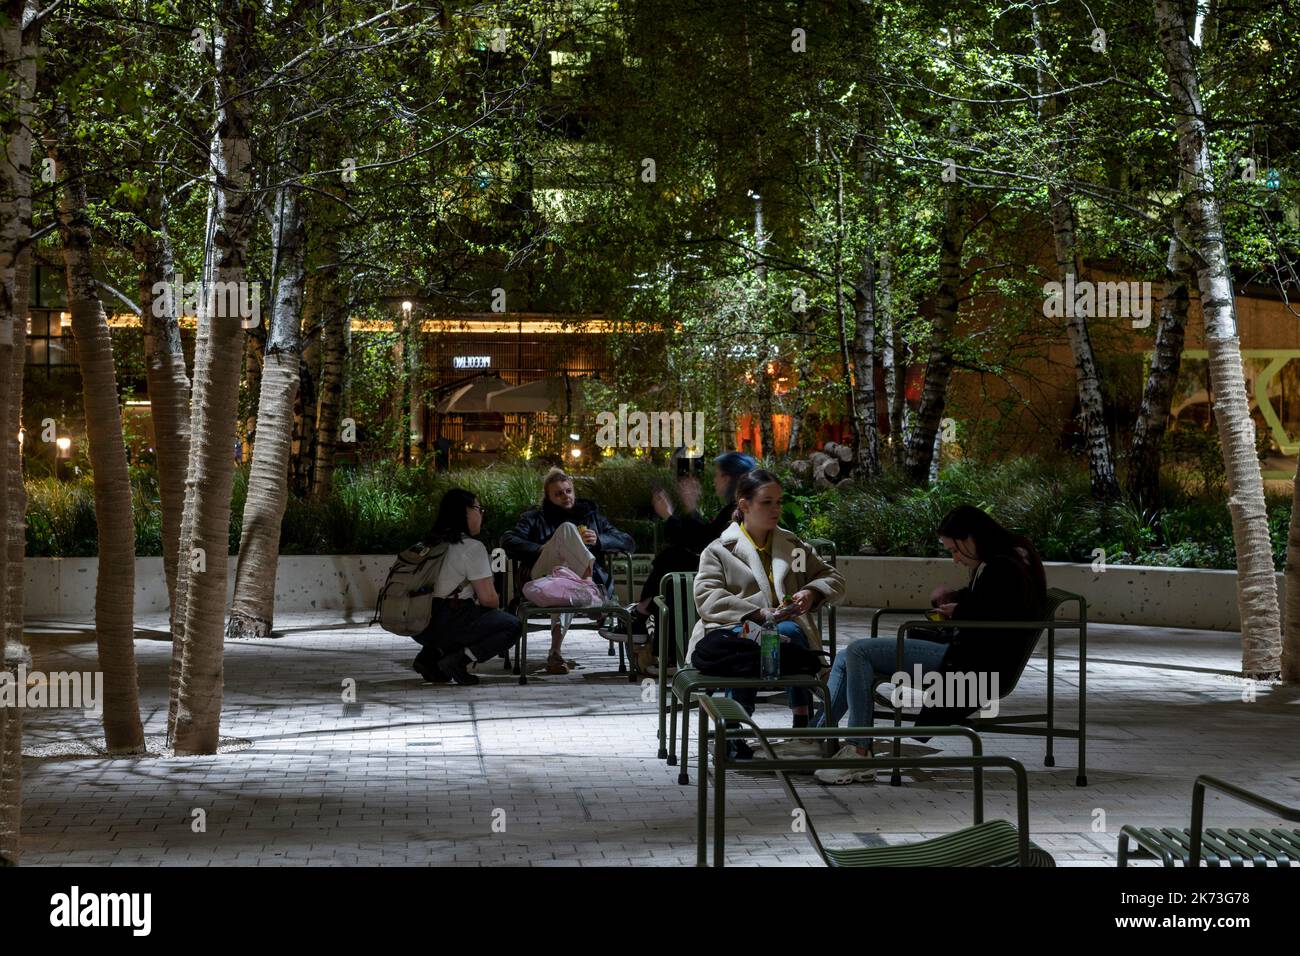 Seating area below trees with dappled lighting. Exchange Square, London, United Kingdom. Architect: DSDHA, 2022. Stock Photo